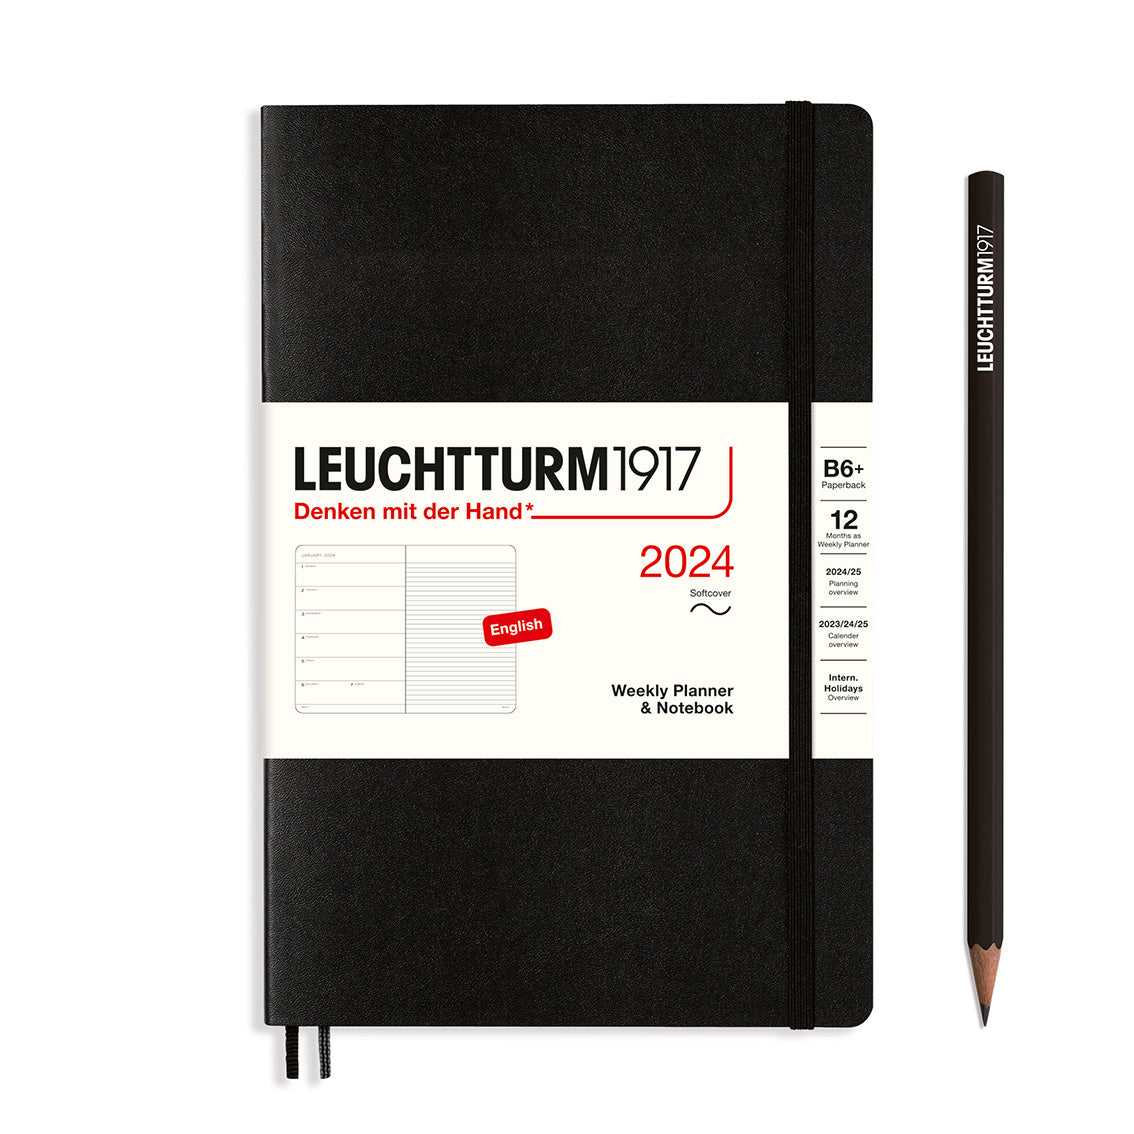 An image of a black planner with a black elastic band holding it together and a cream paper wrap around the middle stating the business name Leuchtturm1917, that it is for the year 2024, it is a weekly planner and notebook, is B6+ in size and an English language version. It has an image on the wrap showing the inside layout which is a week on the left hand page and a notes page on thr right hand page. A black pencil is shown at the side of the planner.